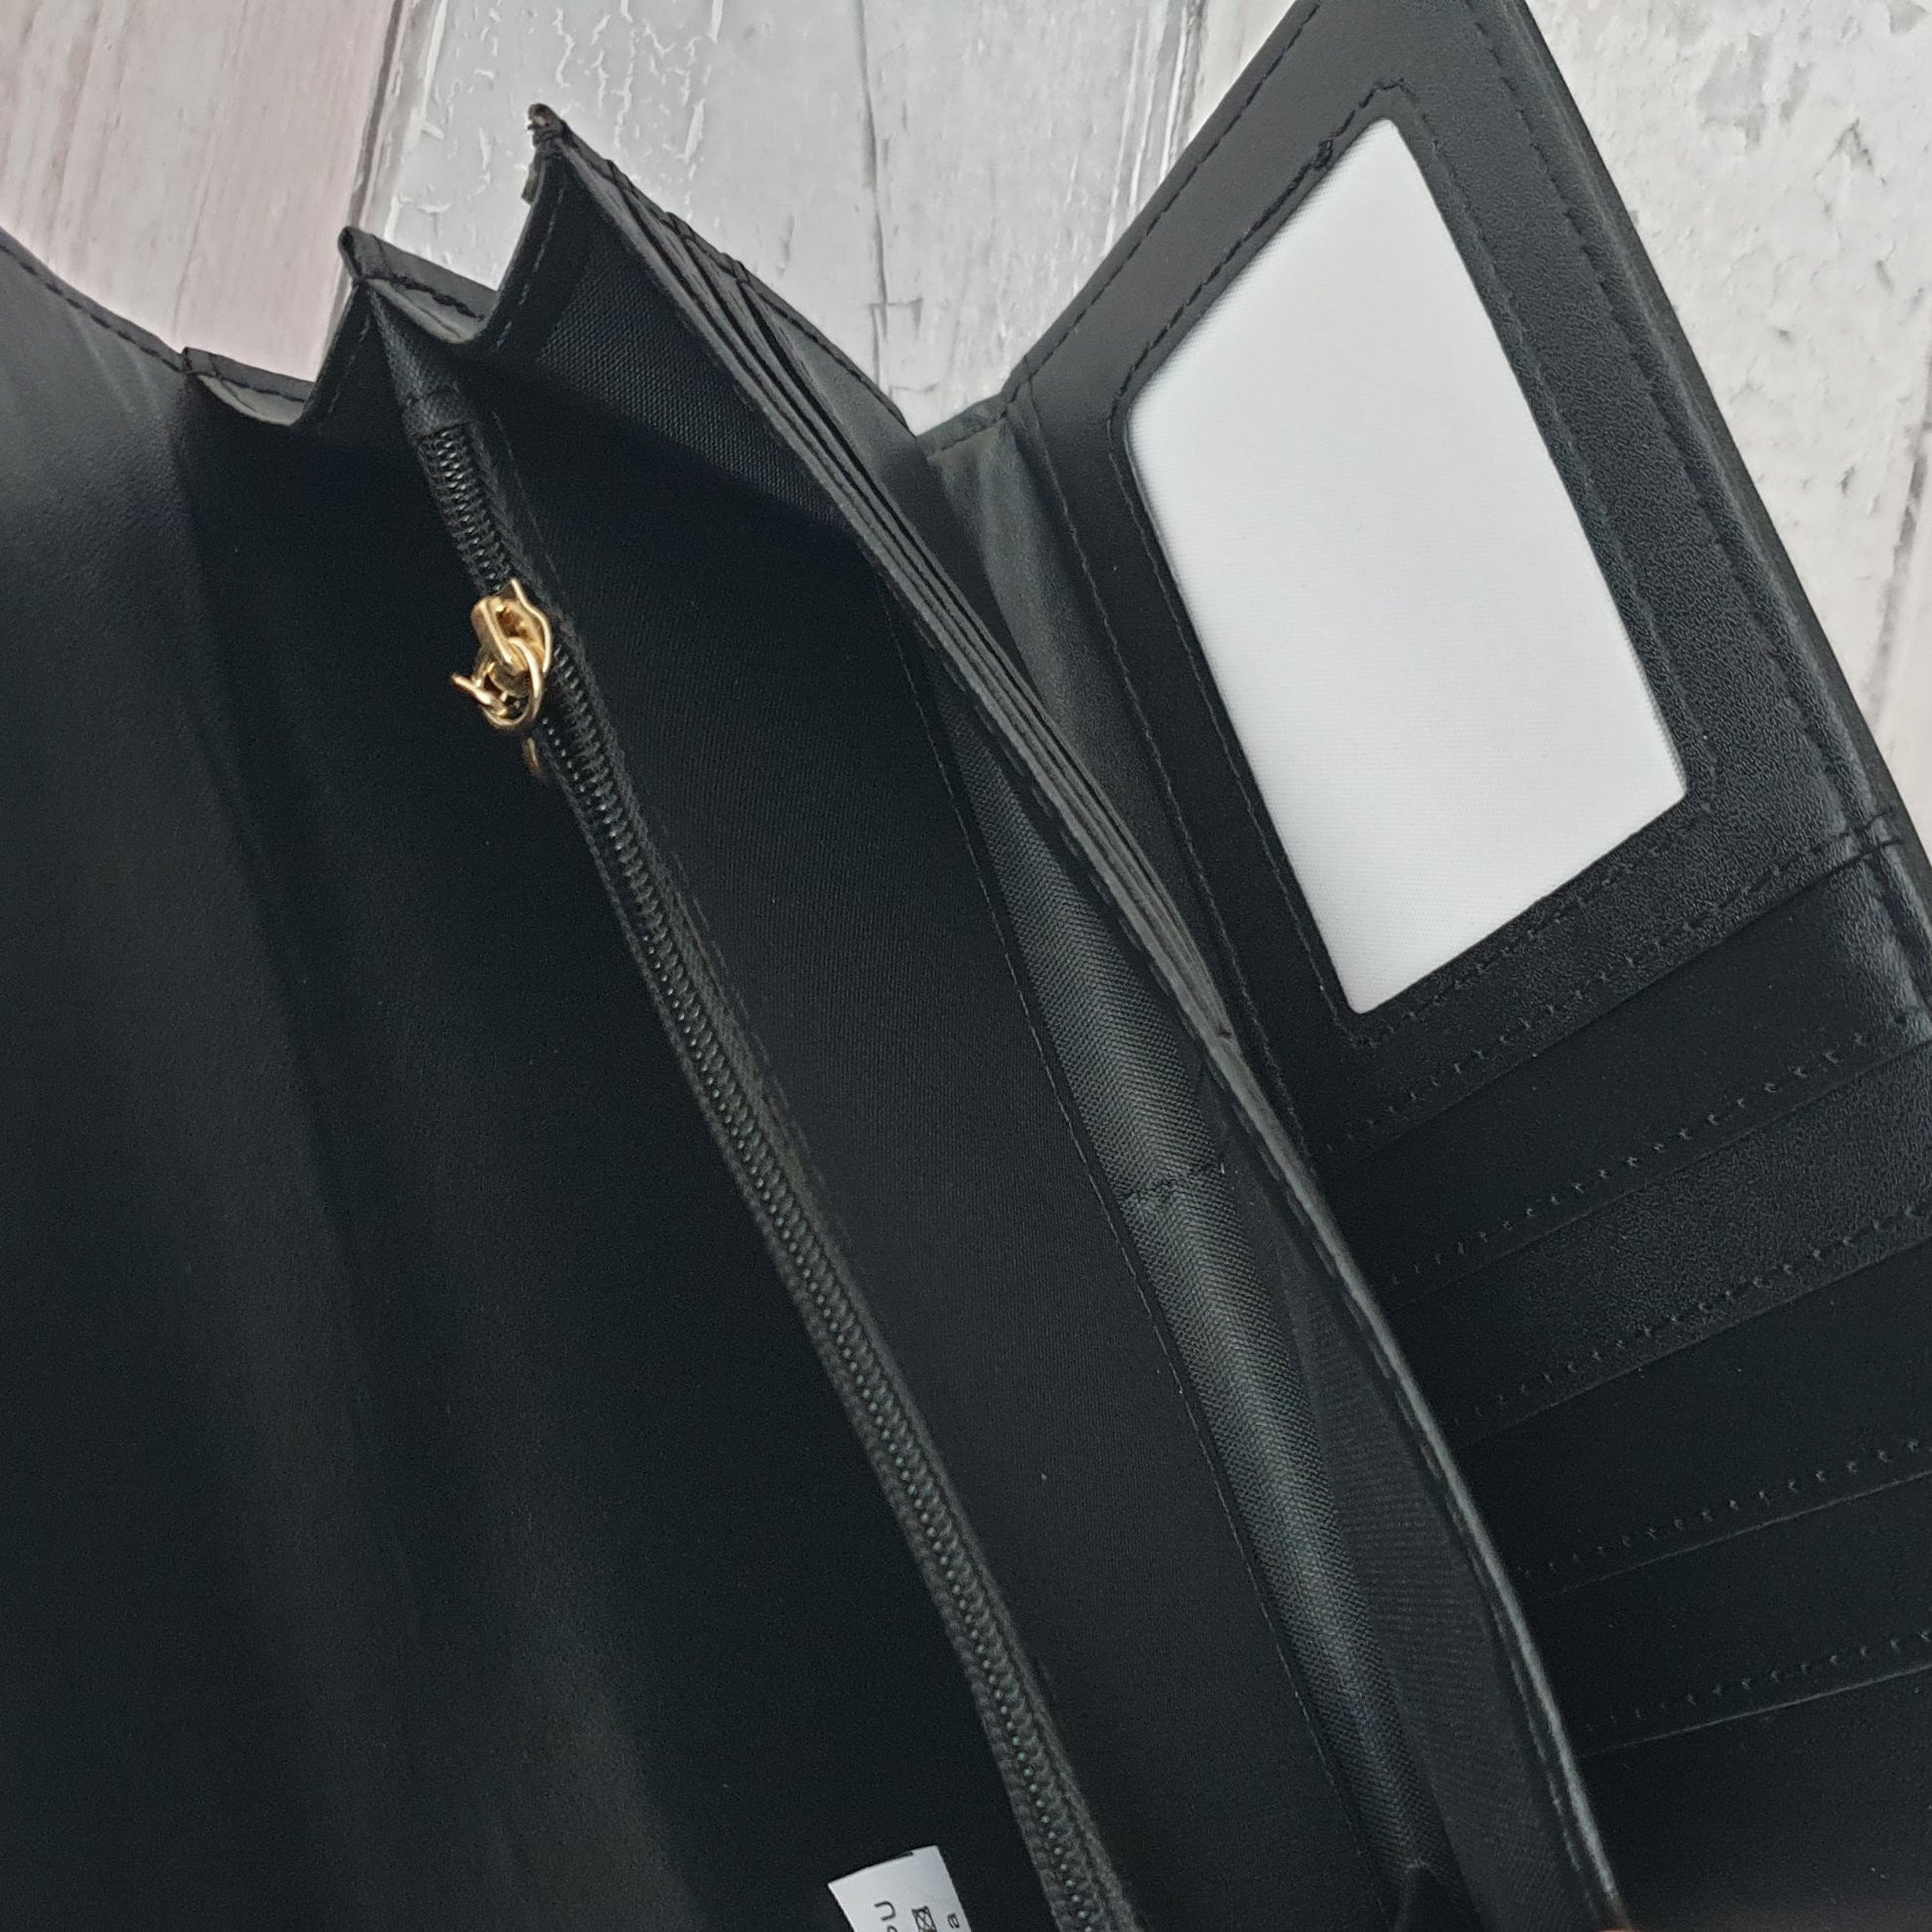 Photo of a gift boxed black purse